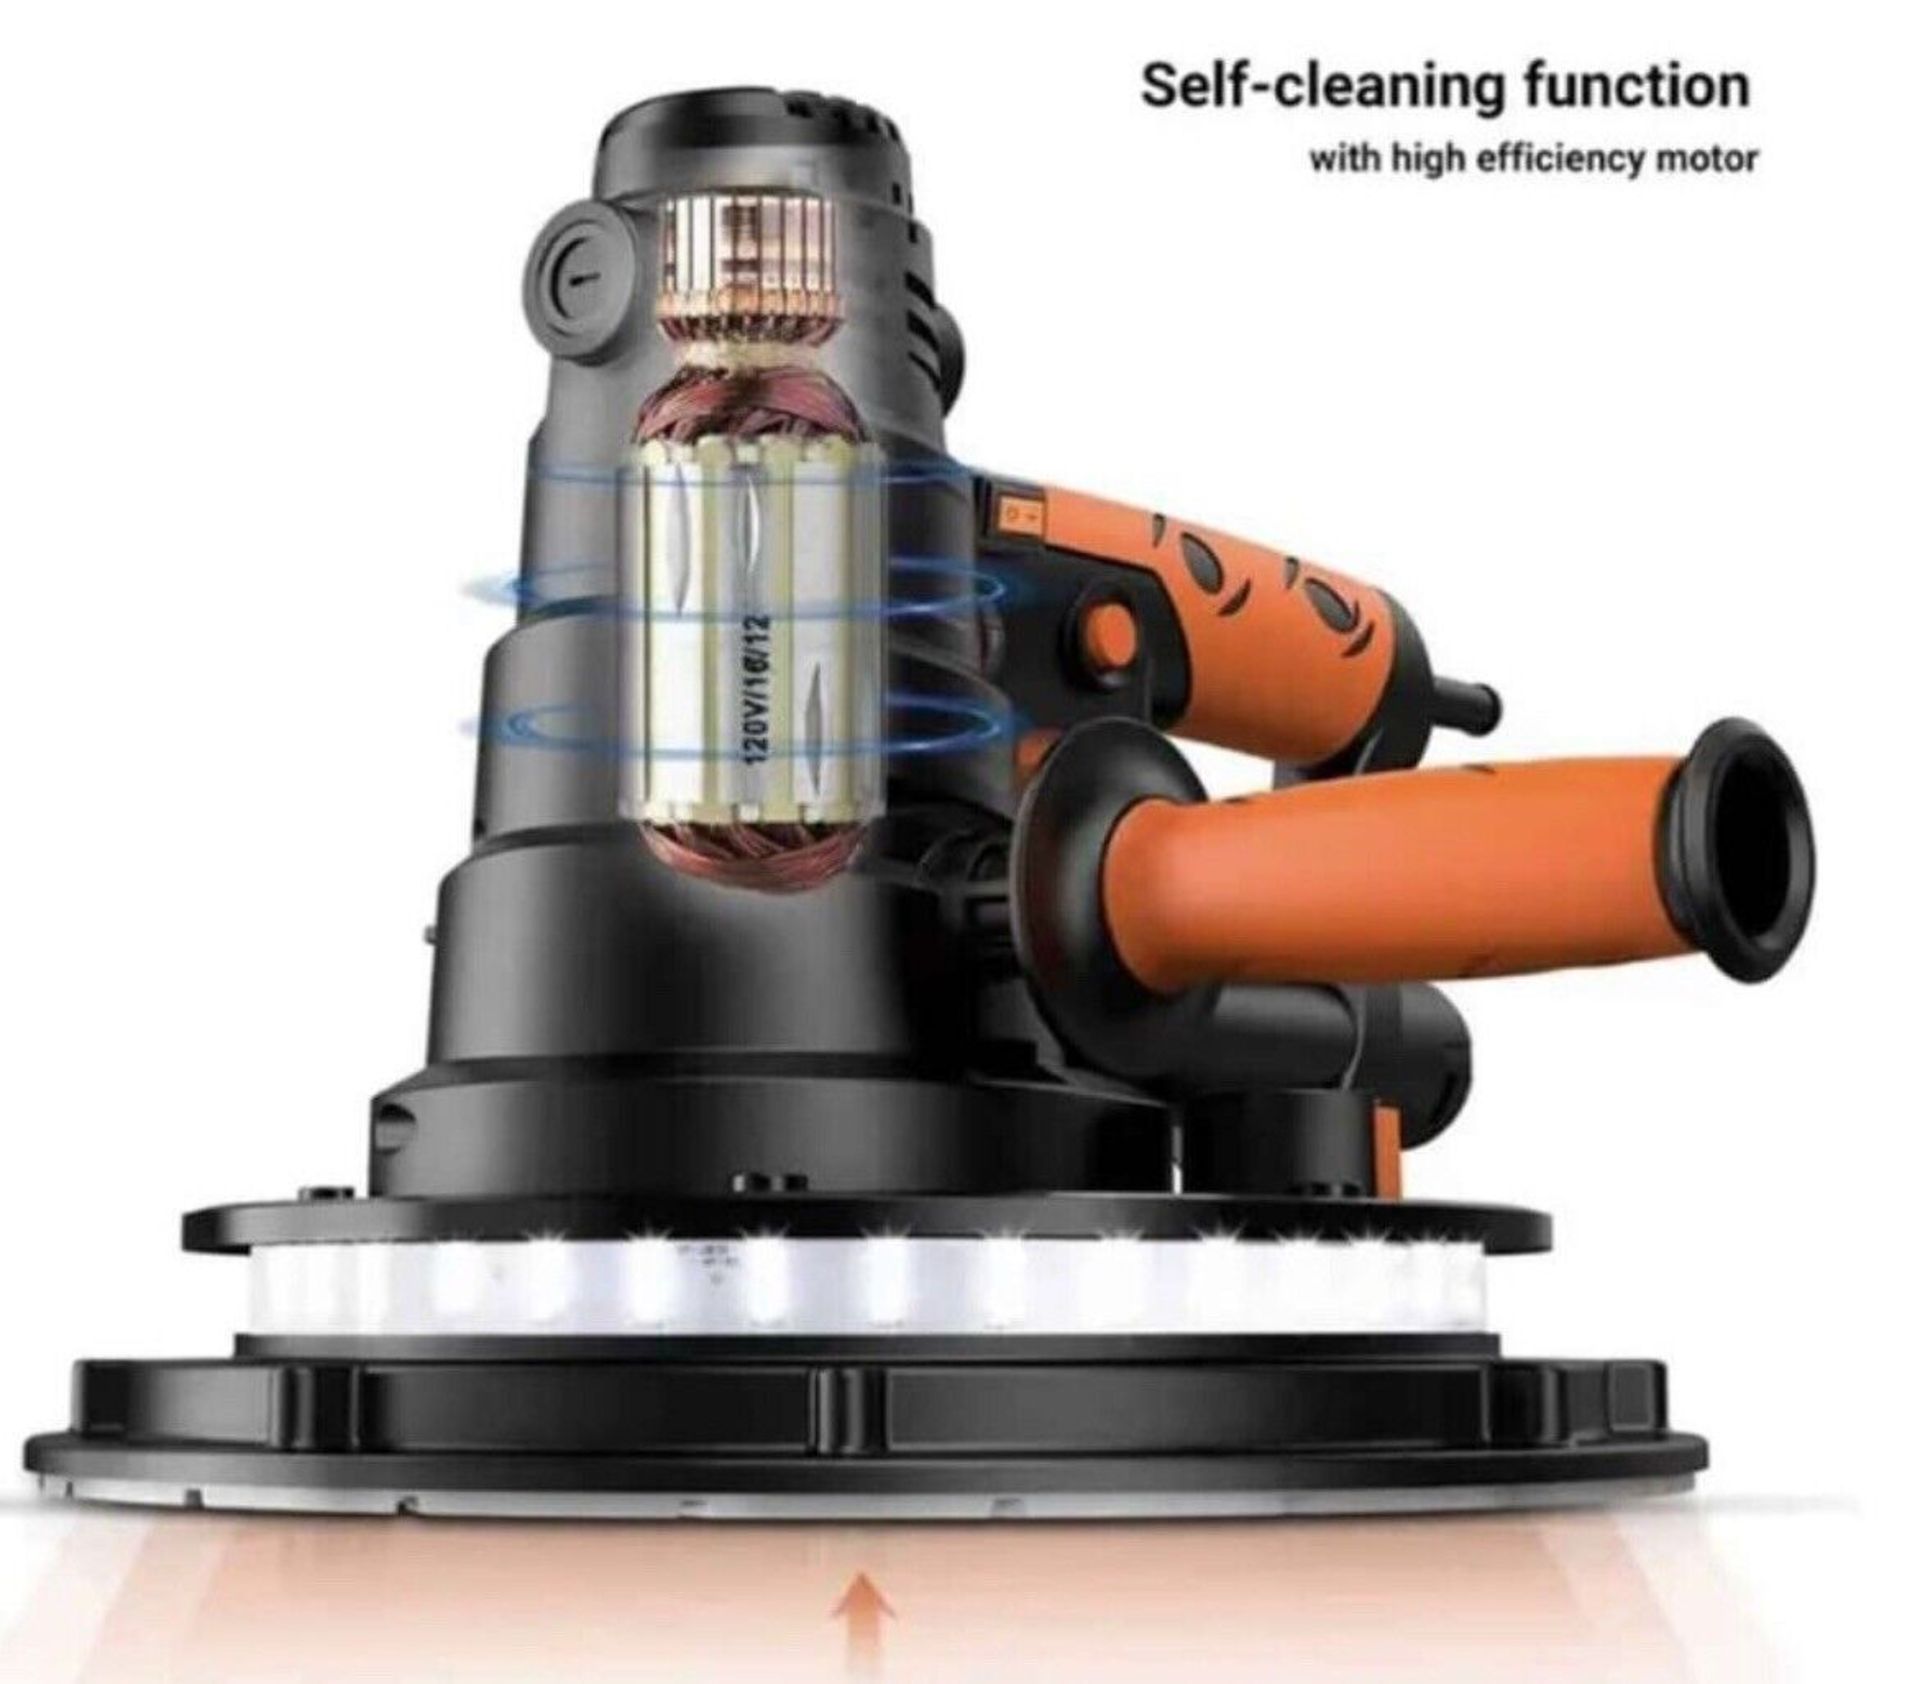 10 X NEW BOXED TACKLIFE 800W Electric Drywall Sander Automatic Vacuum Dust Collection System. (